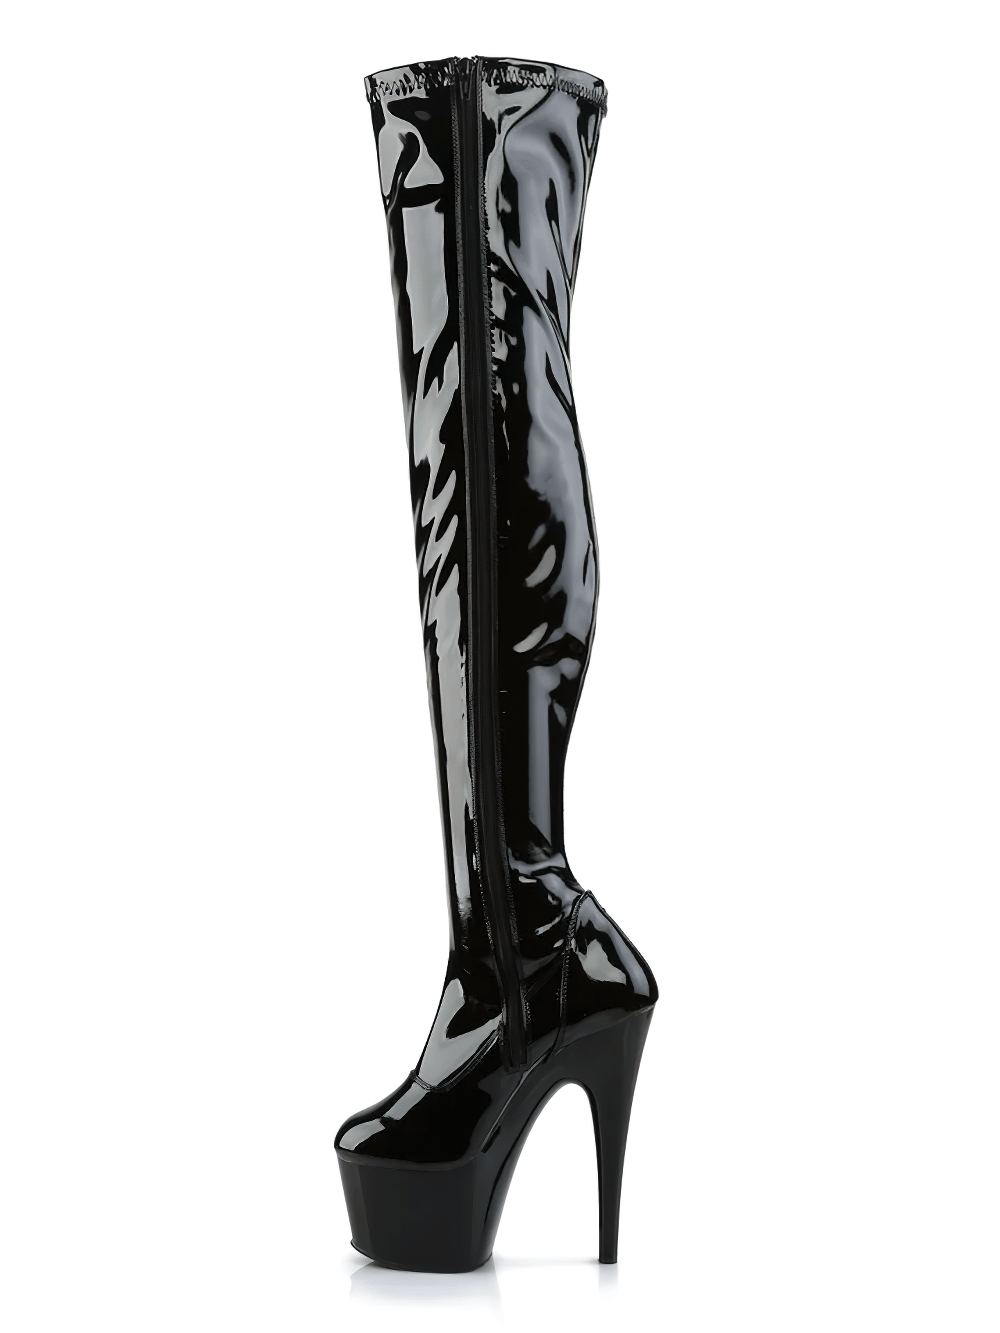 PLEASER Glossy Black Stretch Thigh-High Boots with Zipper